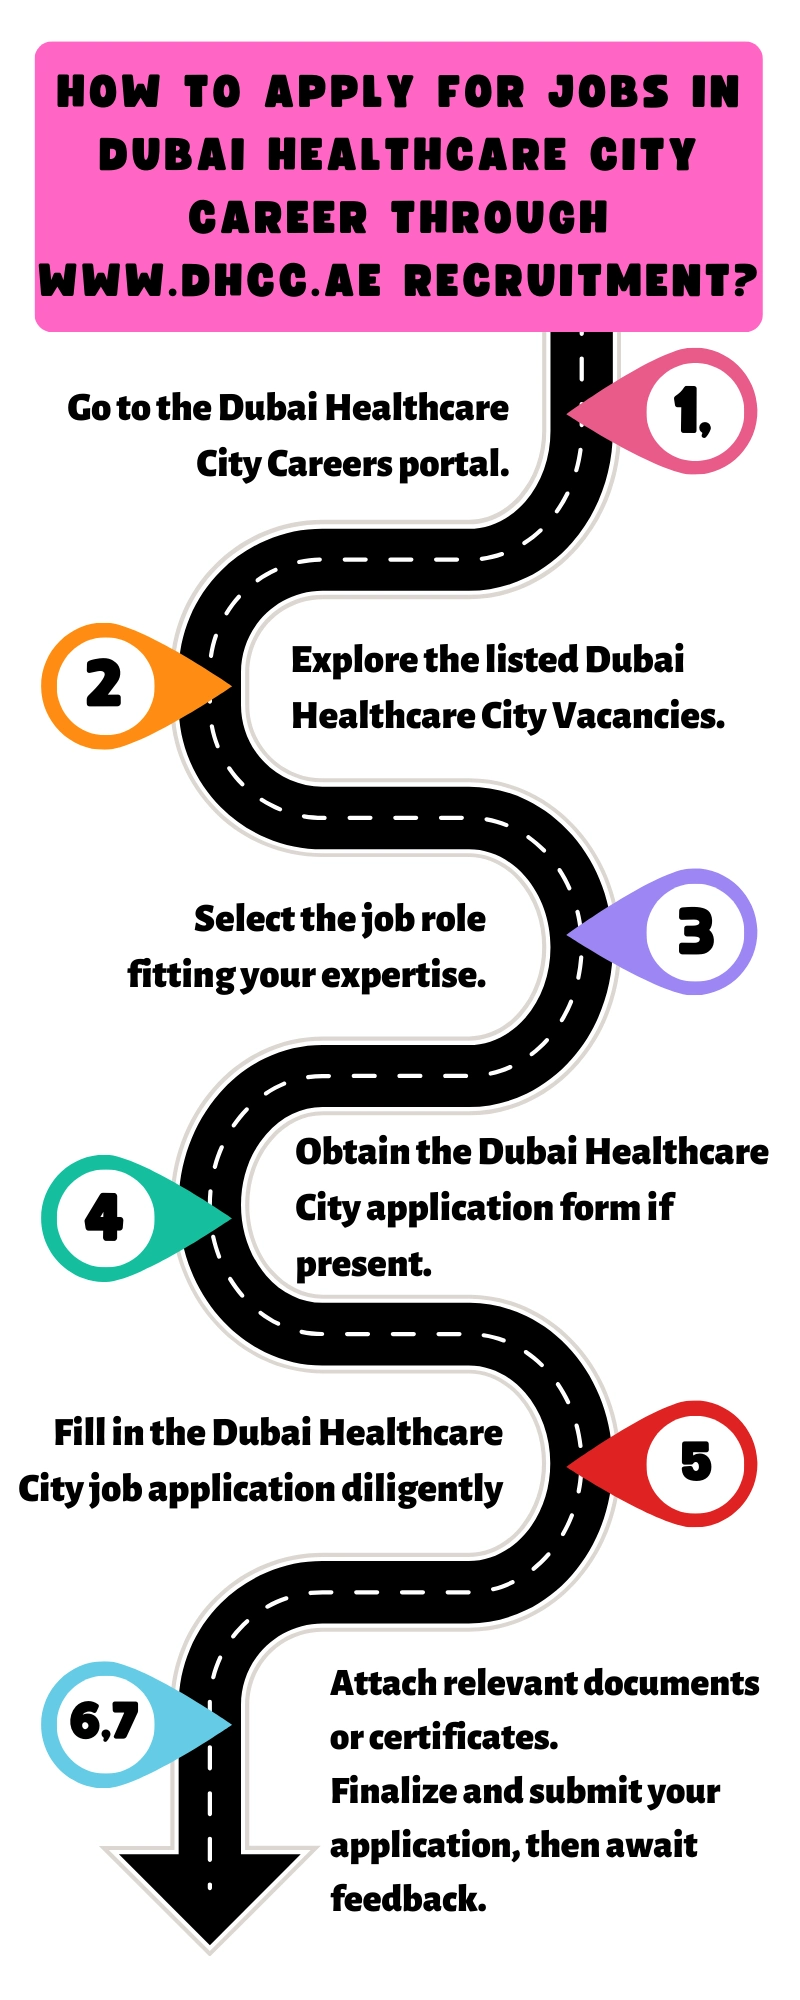 How to Apply for Jobs in Dubai Healthcare City Career through www.dhcc.ae recruitment